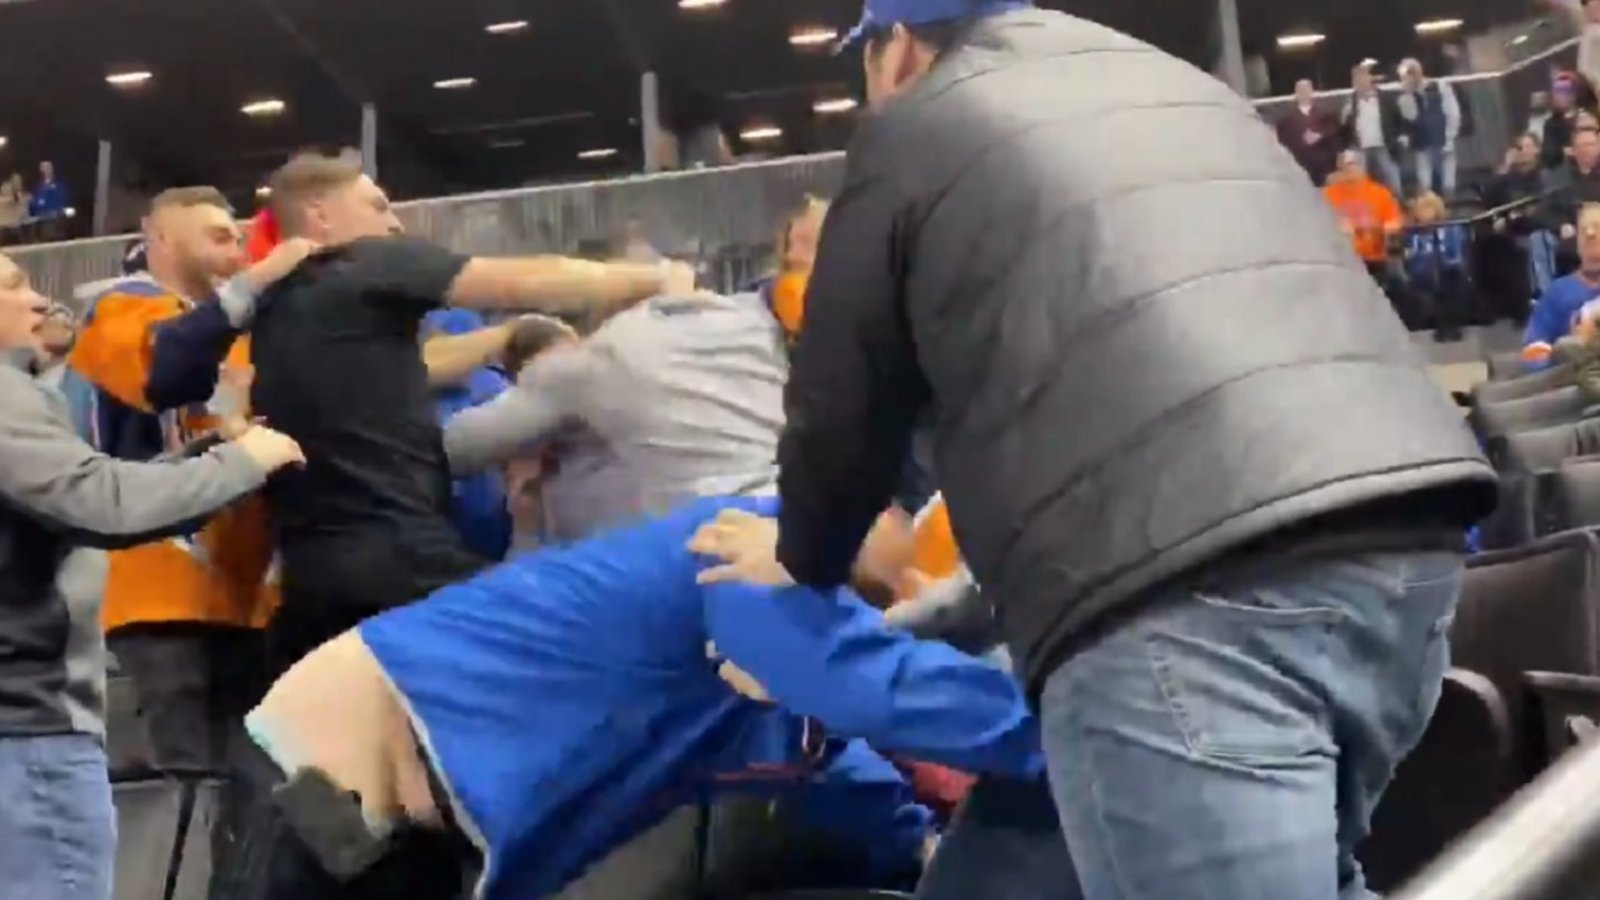 Brawl breaks out in the crowd at NHL game.